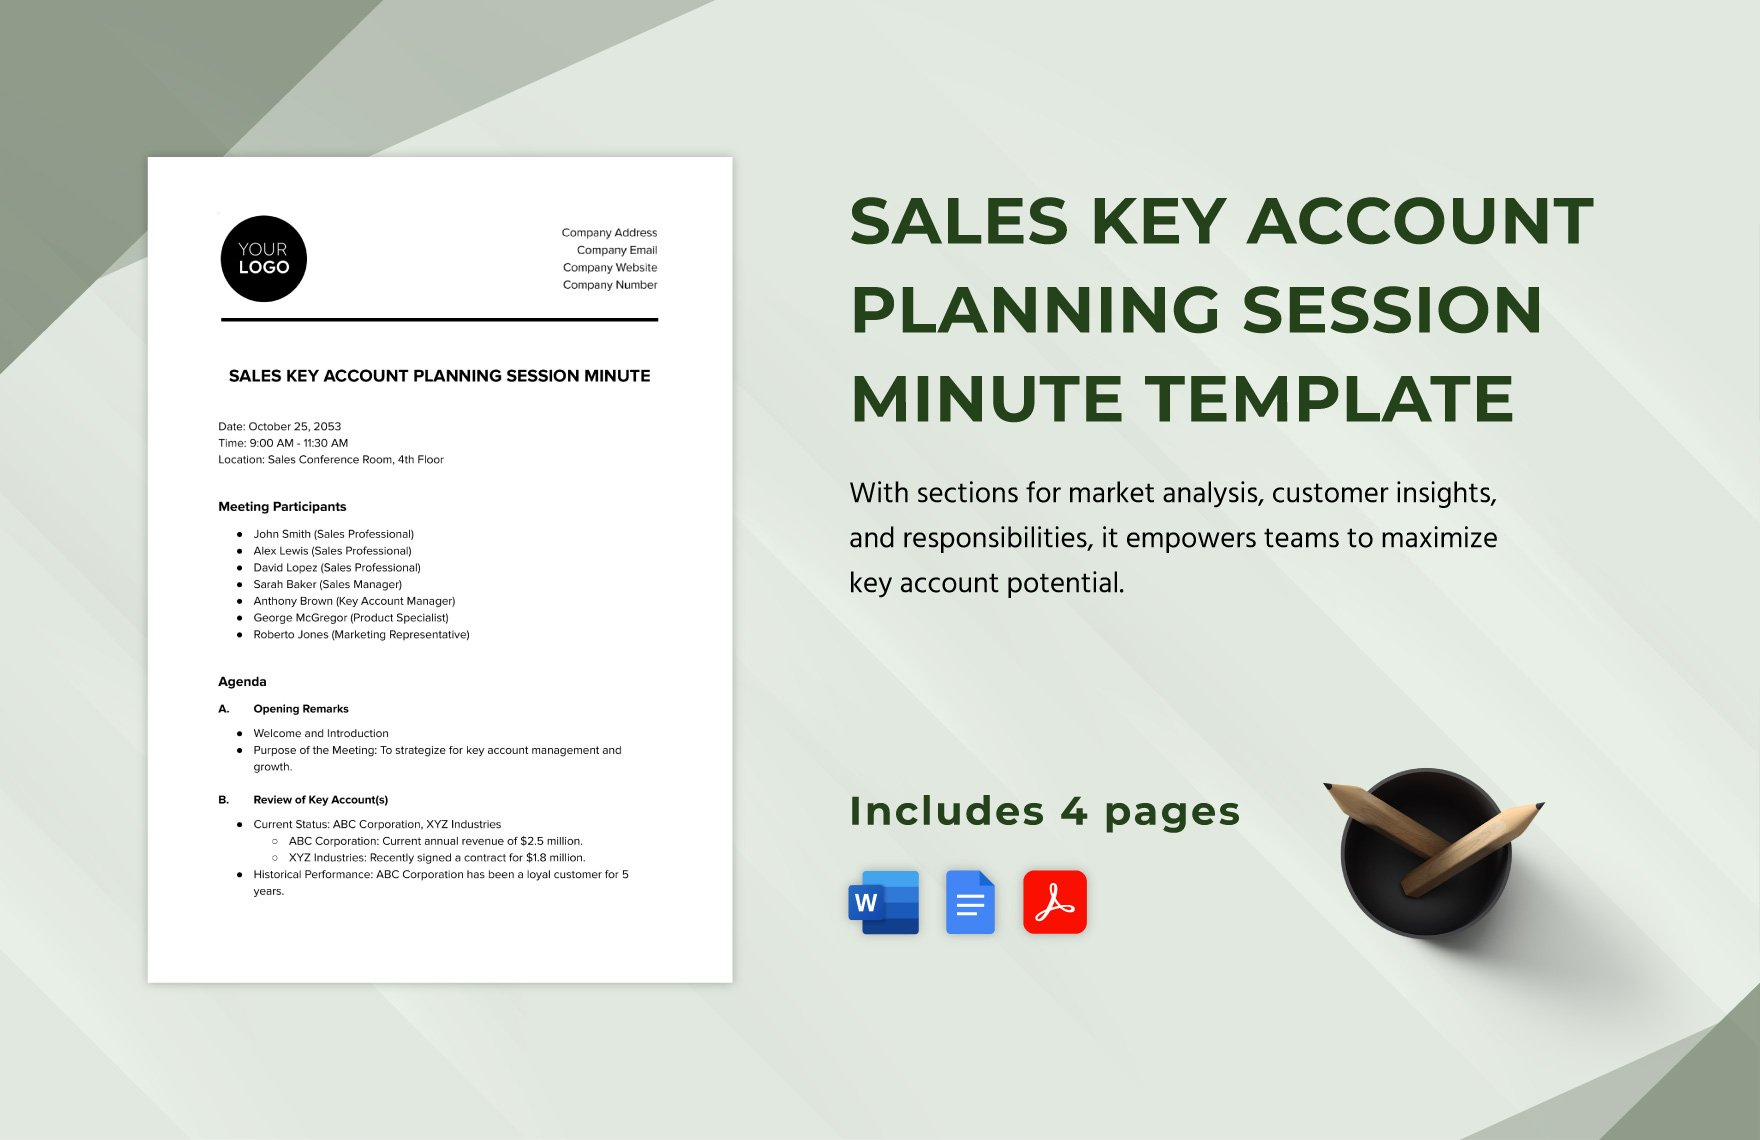 Sales Key Account Planning Session Minute Template